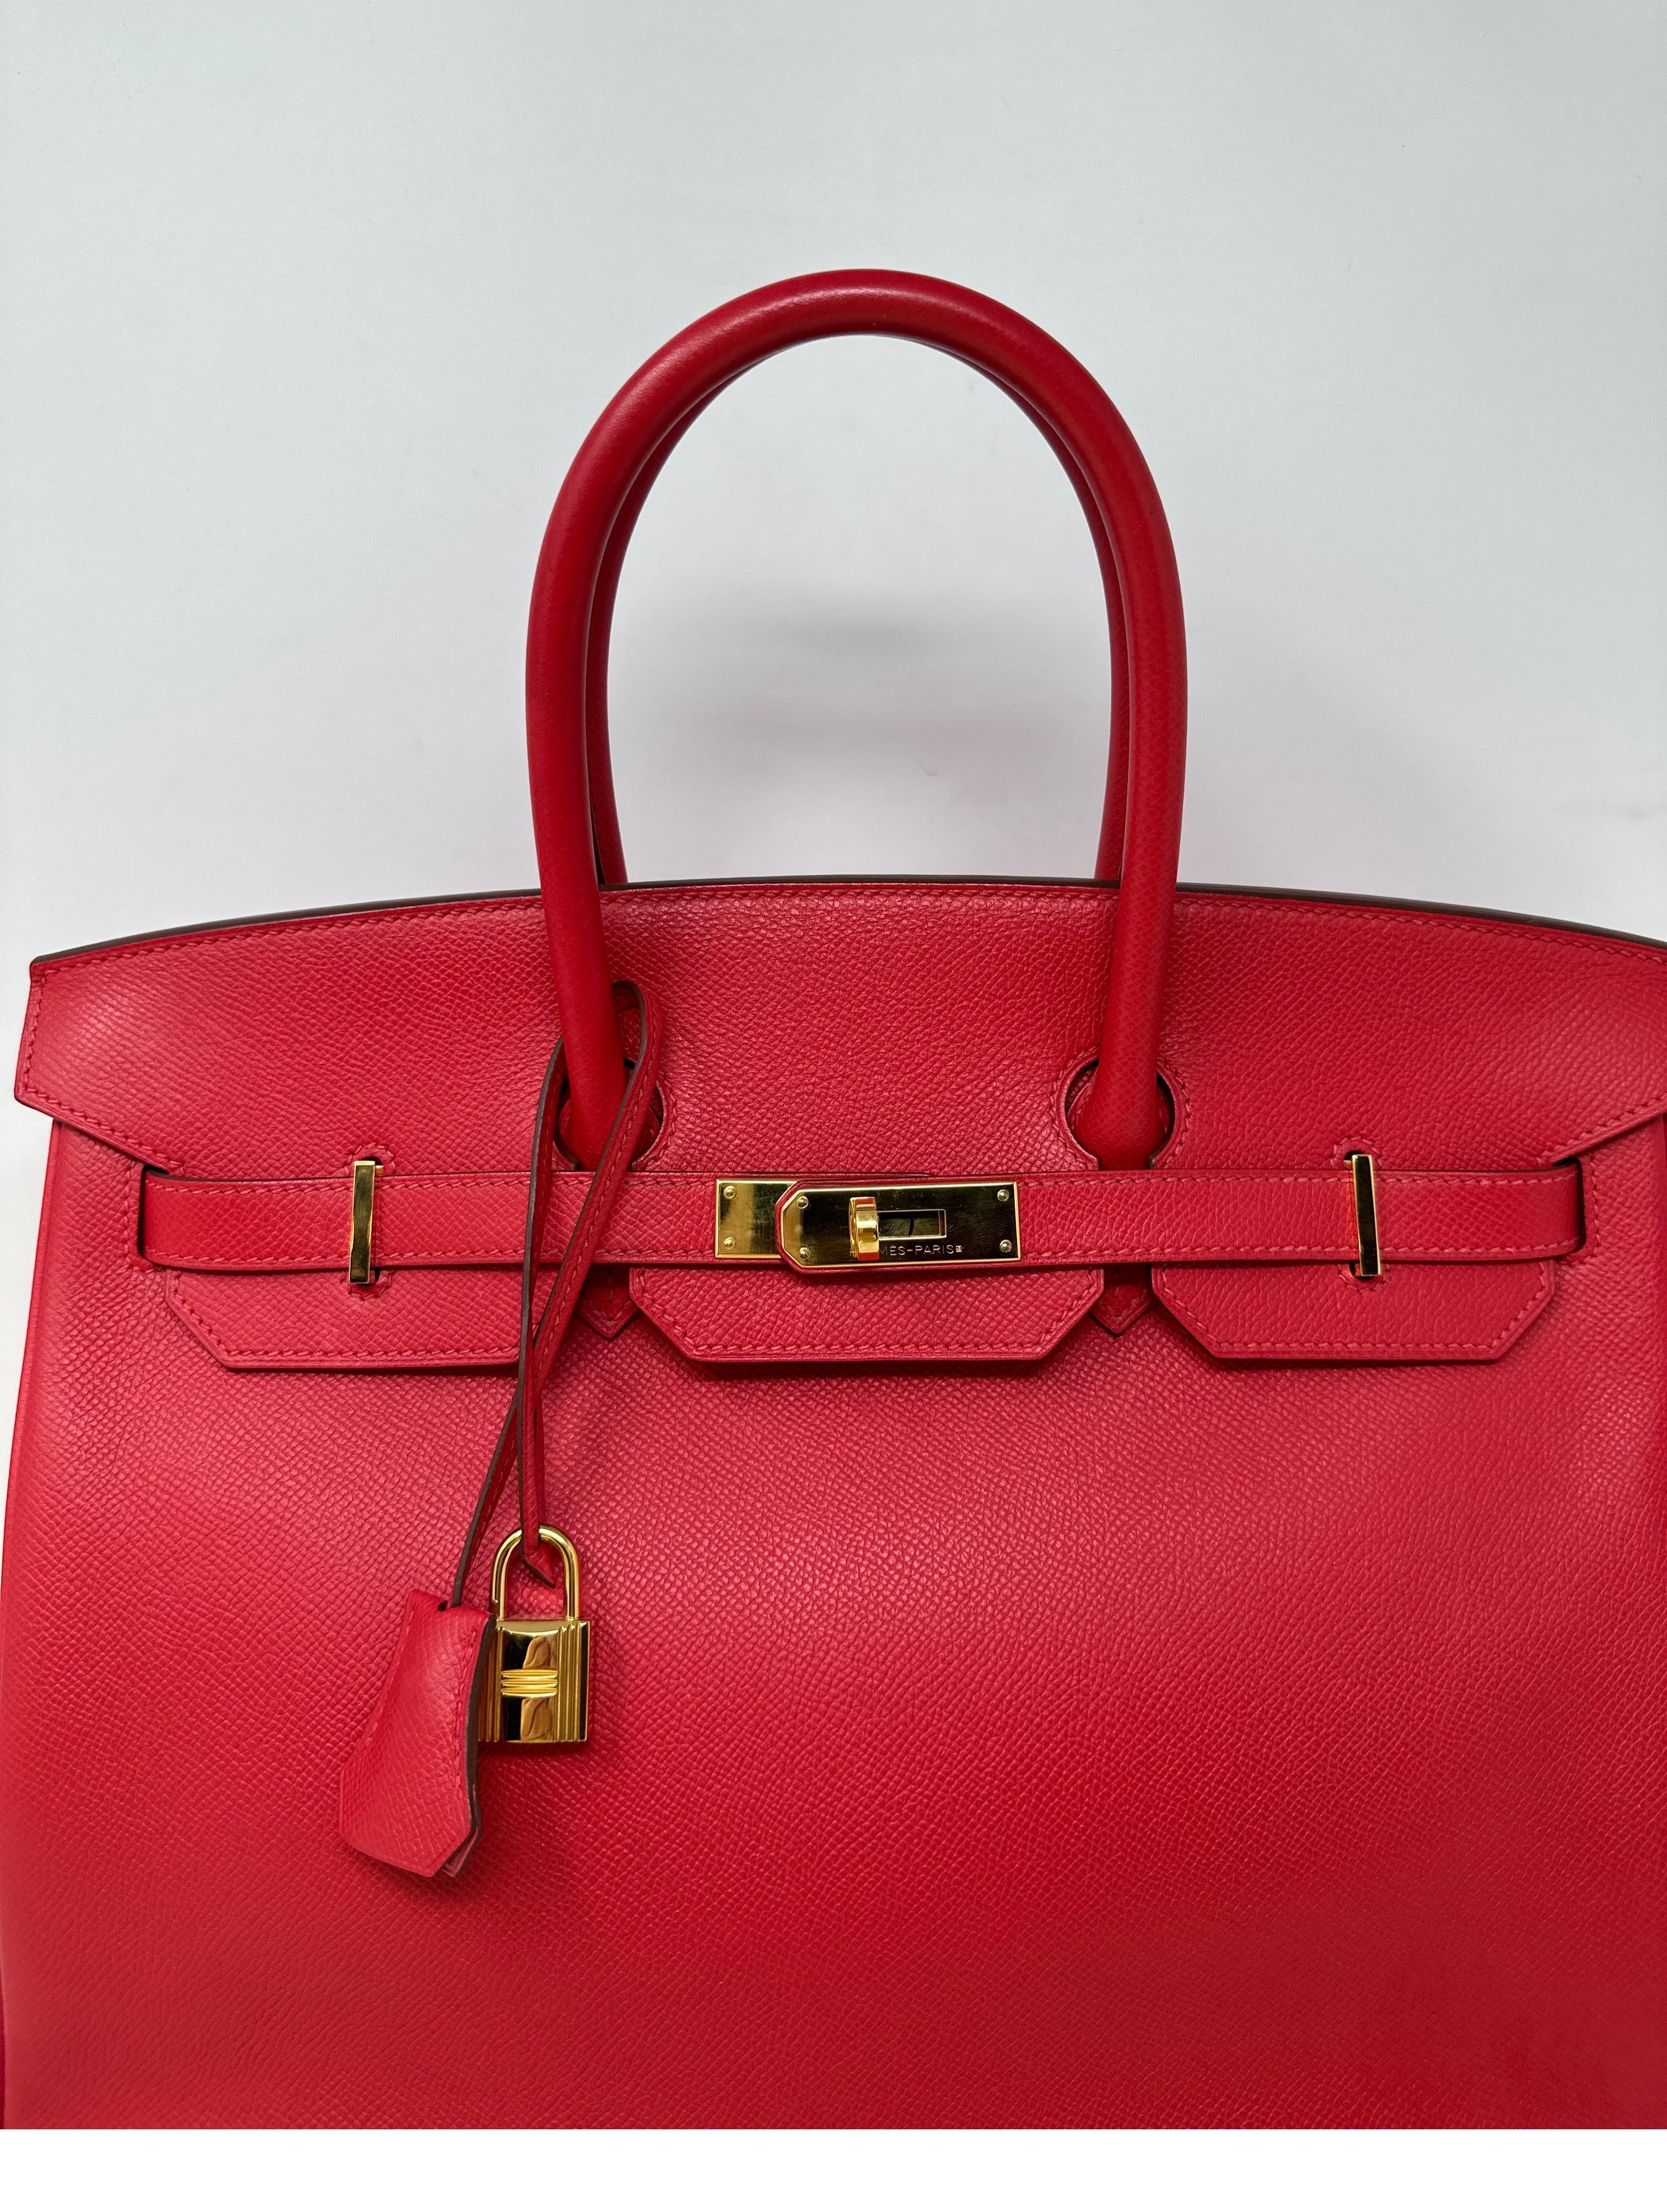 Hermes Rouge Casaque Birkin 35 Bag. Gorgeous red color Birkin. Gold hardware. Bigger bags are coming back. Get all the size 35 you can. This one is the one if you looking for a vibrant color. Interior clean. Excellent condition. Includes clochette,